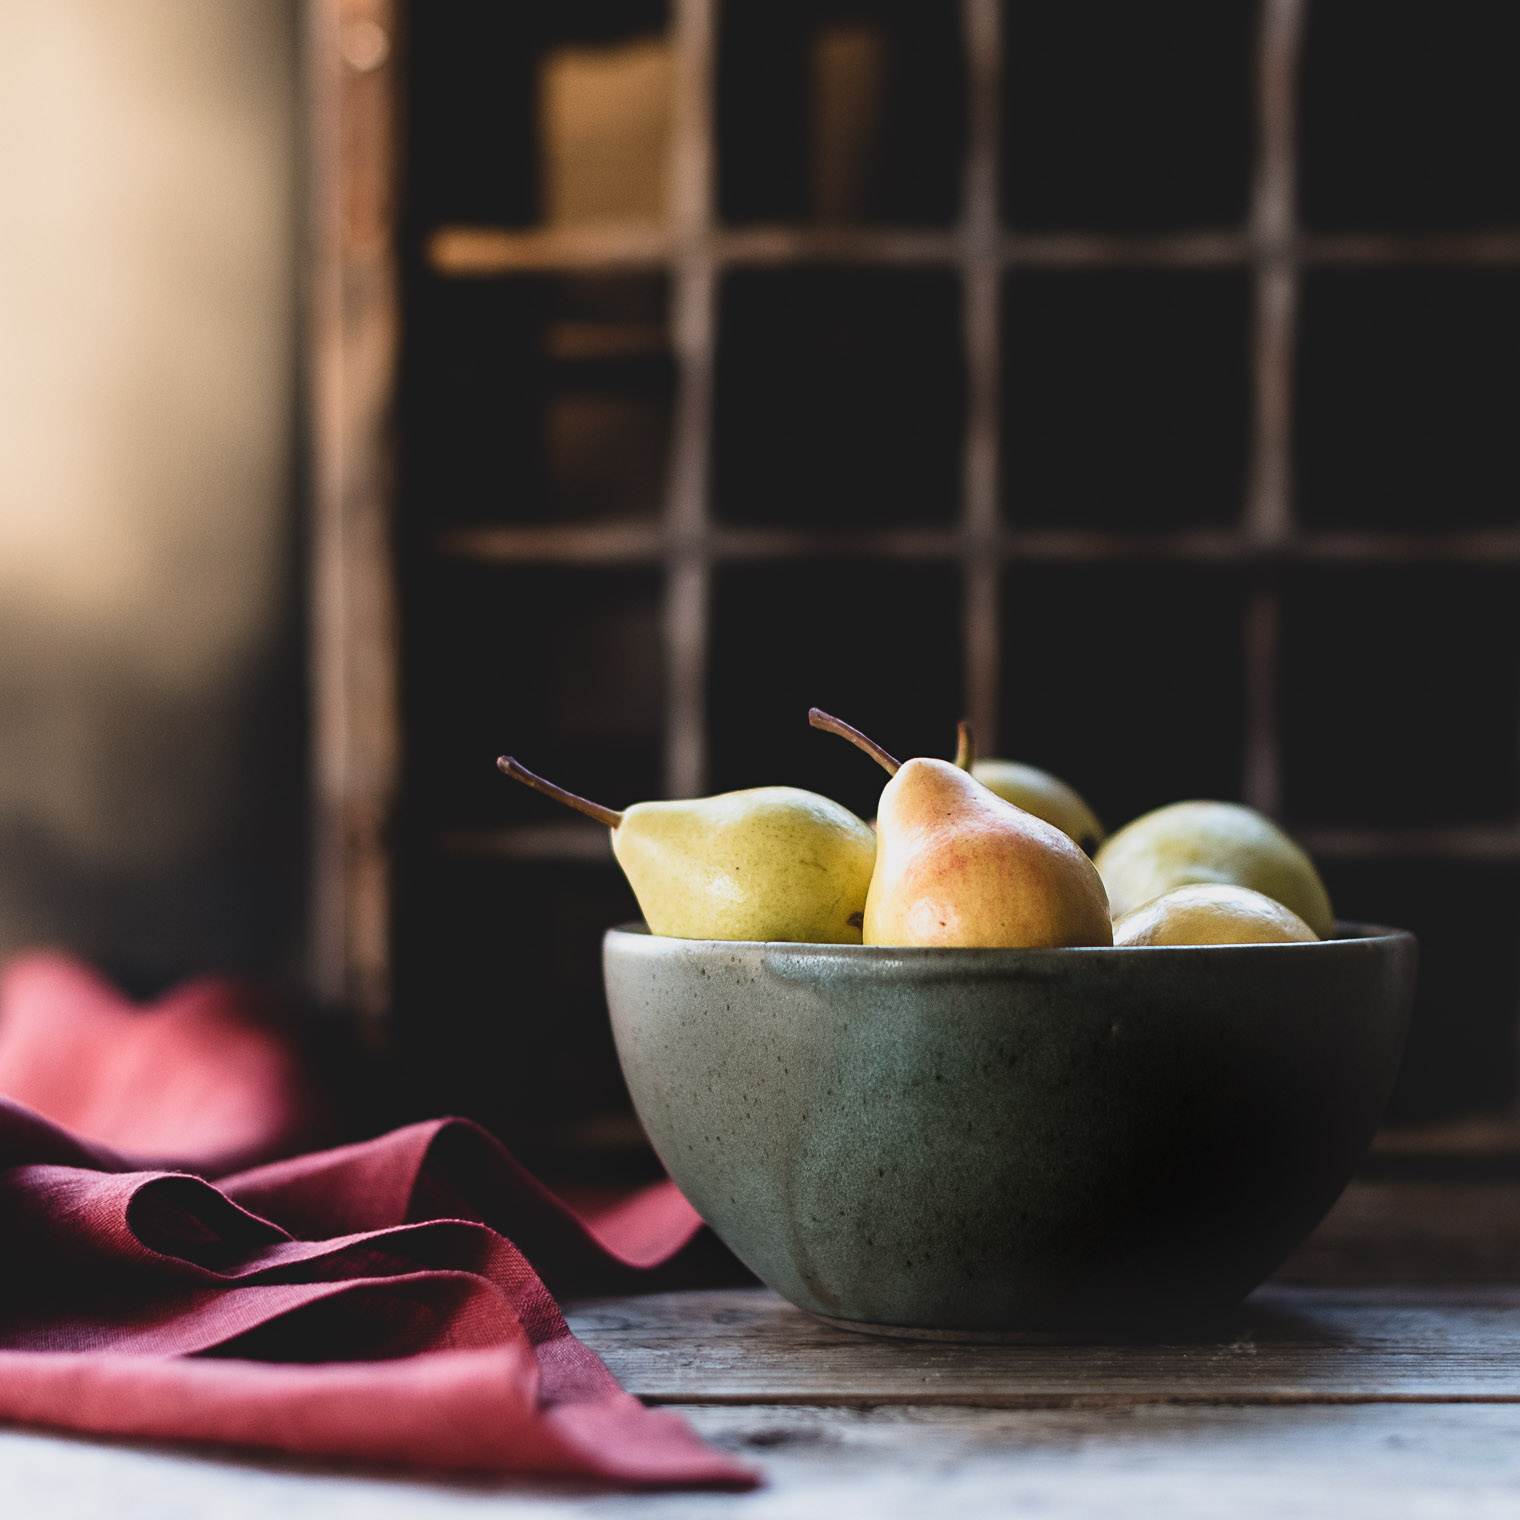 Sunday Sundries, Pears Still Life, Keeping With the Times